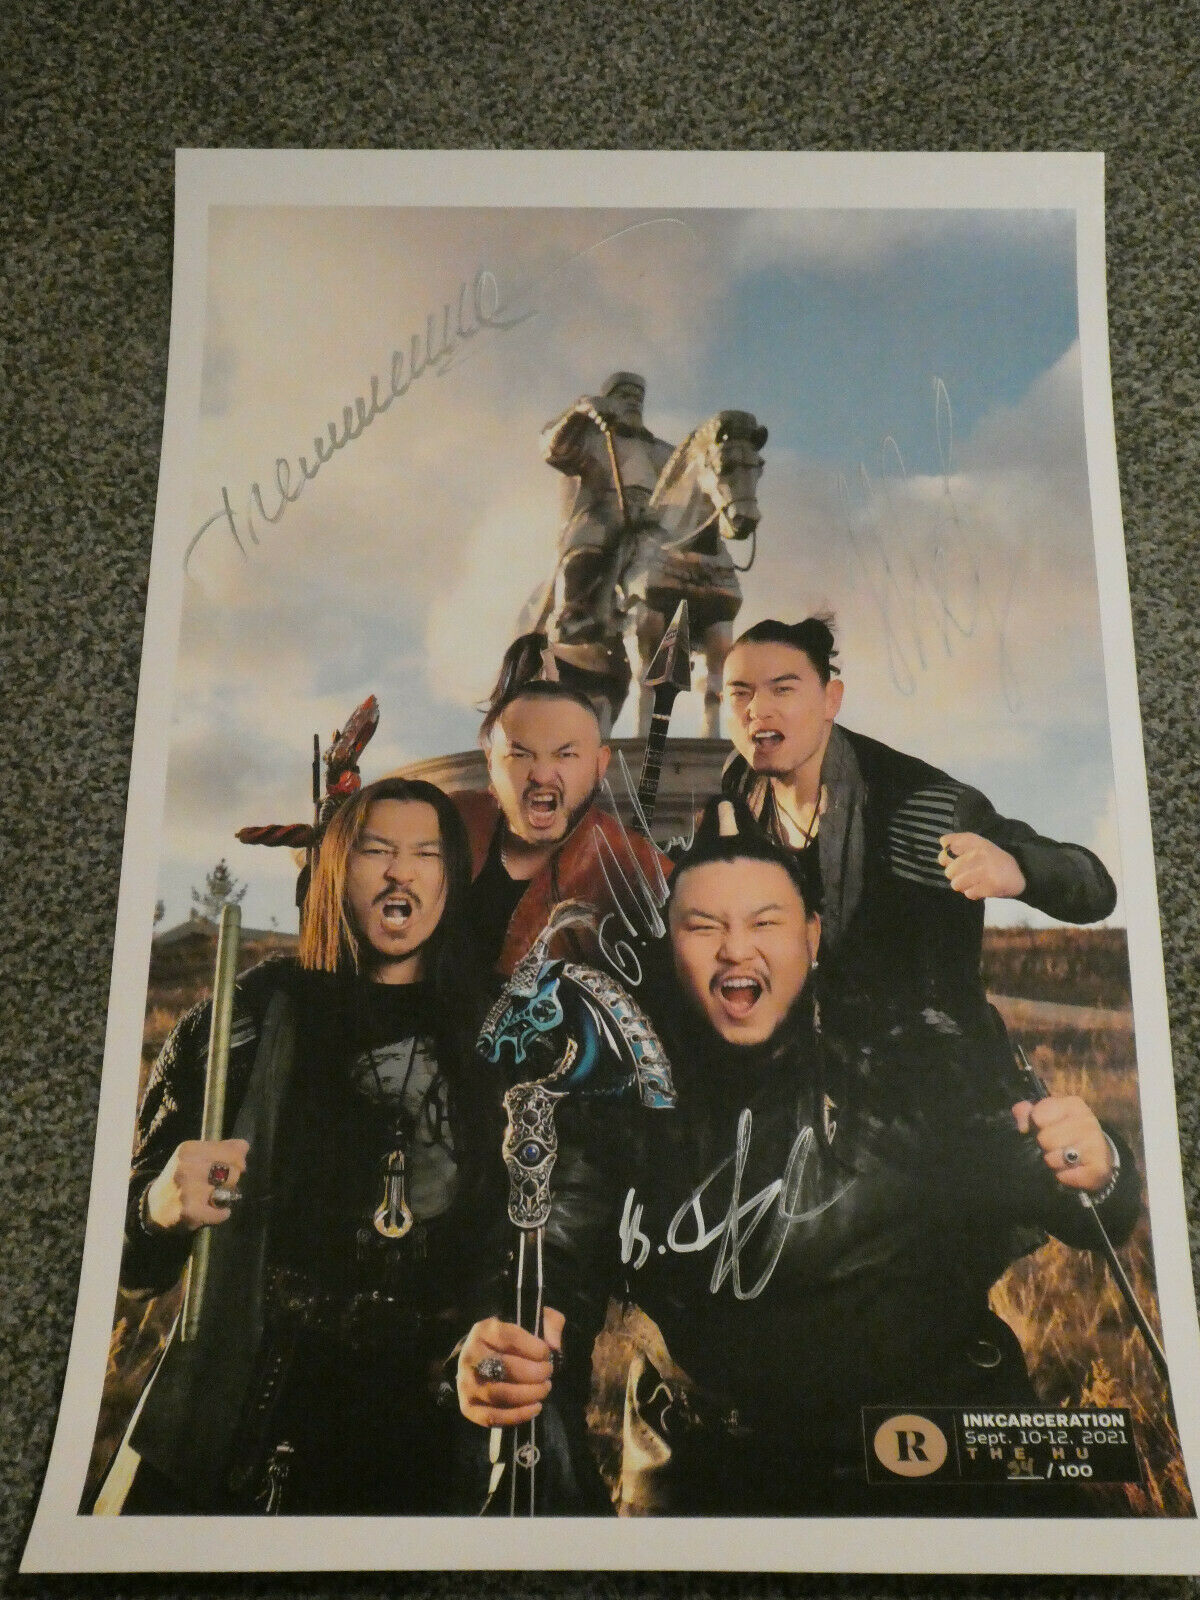 The Hu Hand Signed 13x19 Tour Poster - Inkcarceration Festival. Ships ASAP!